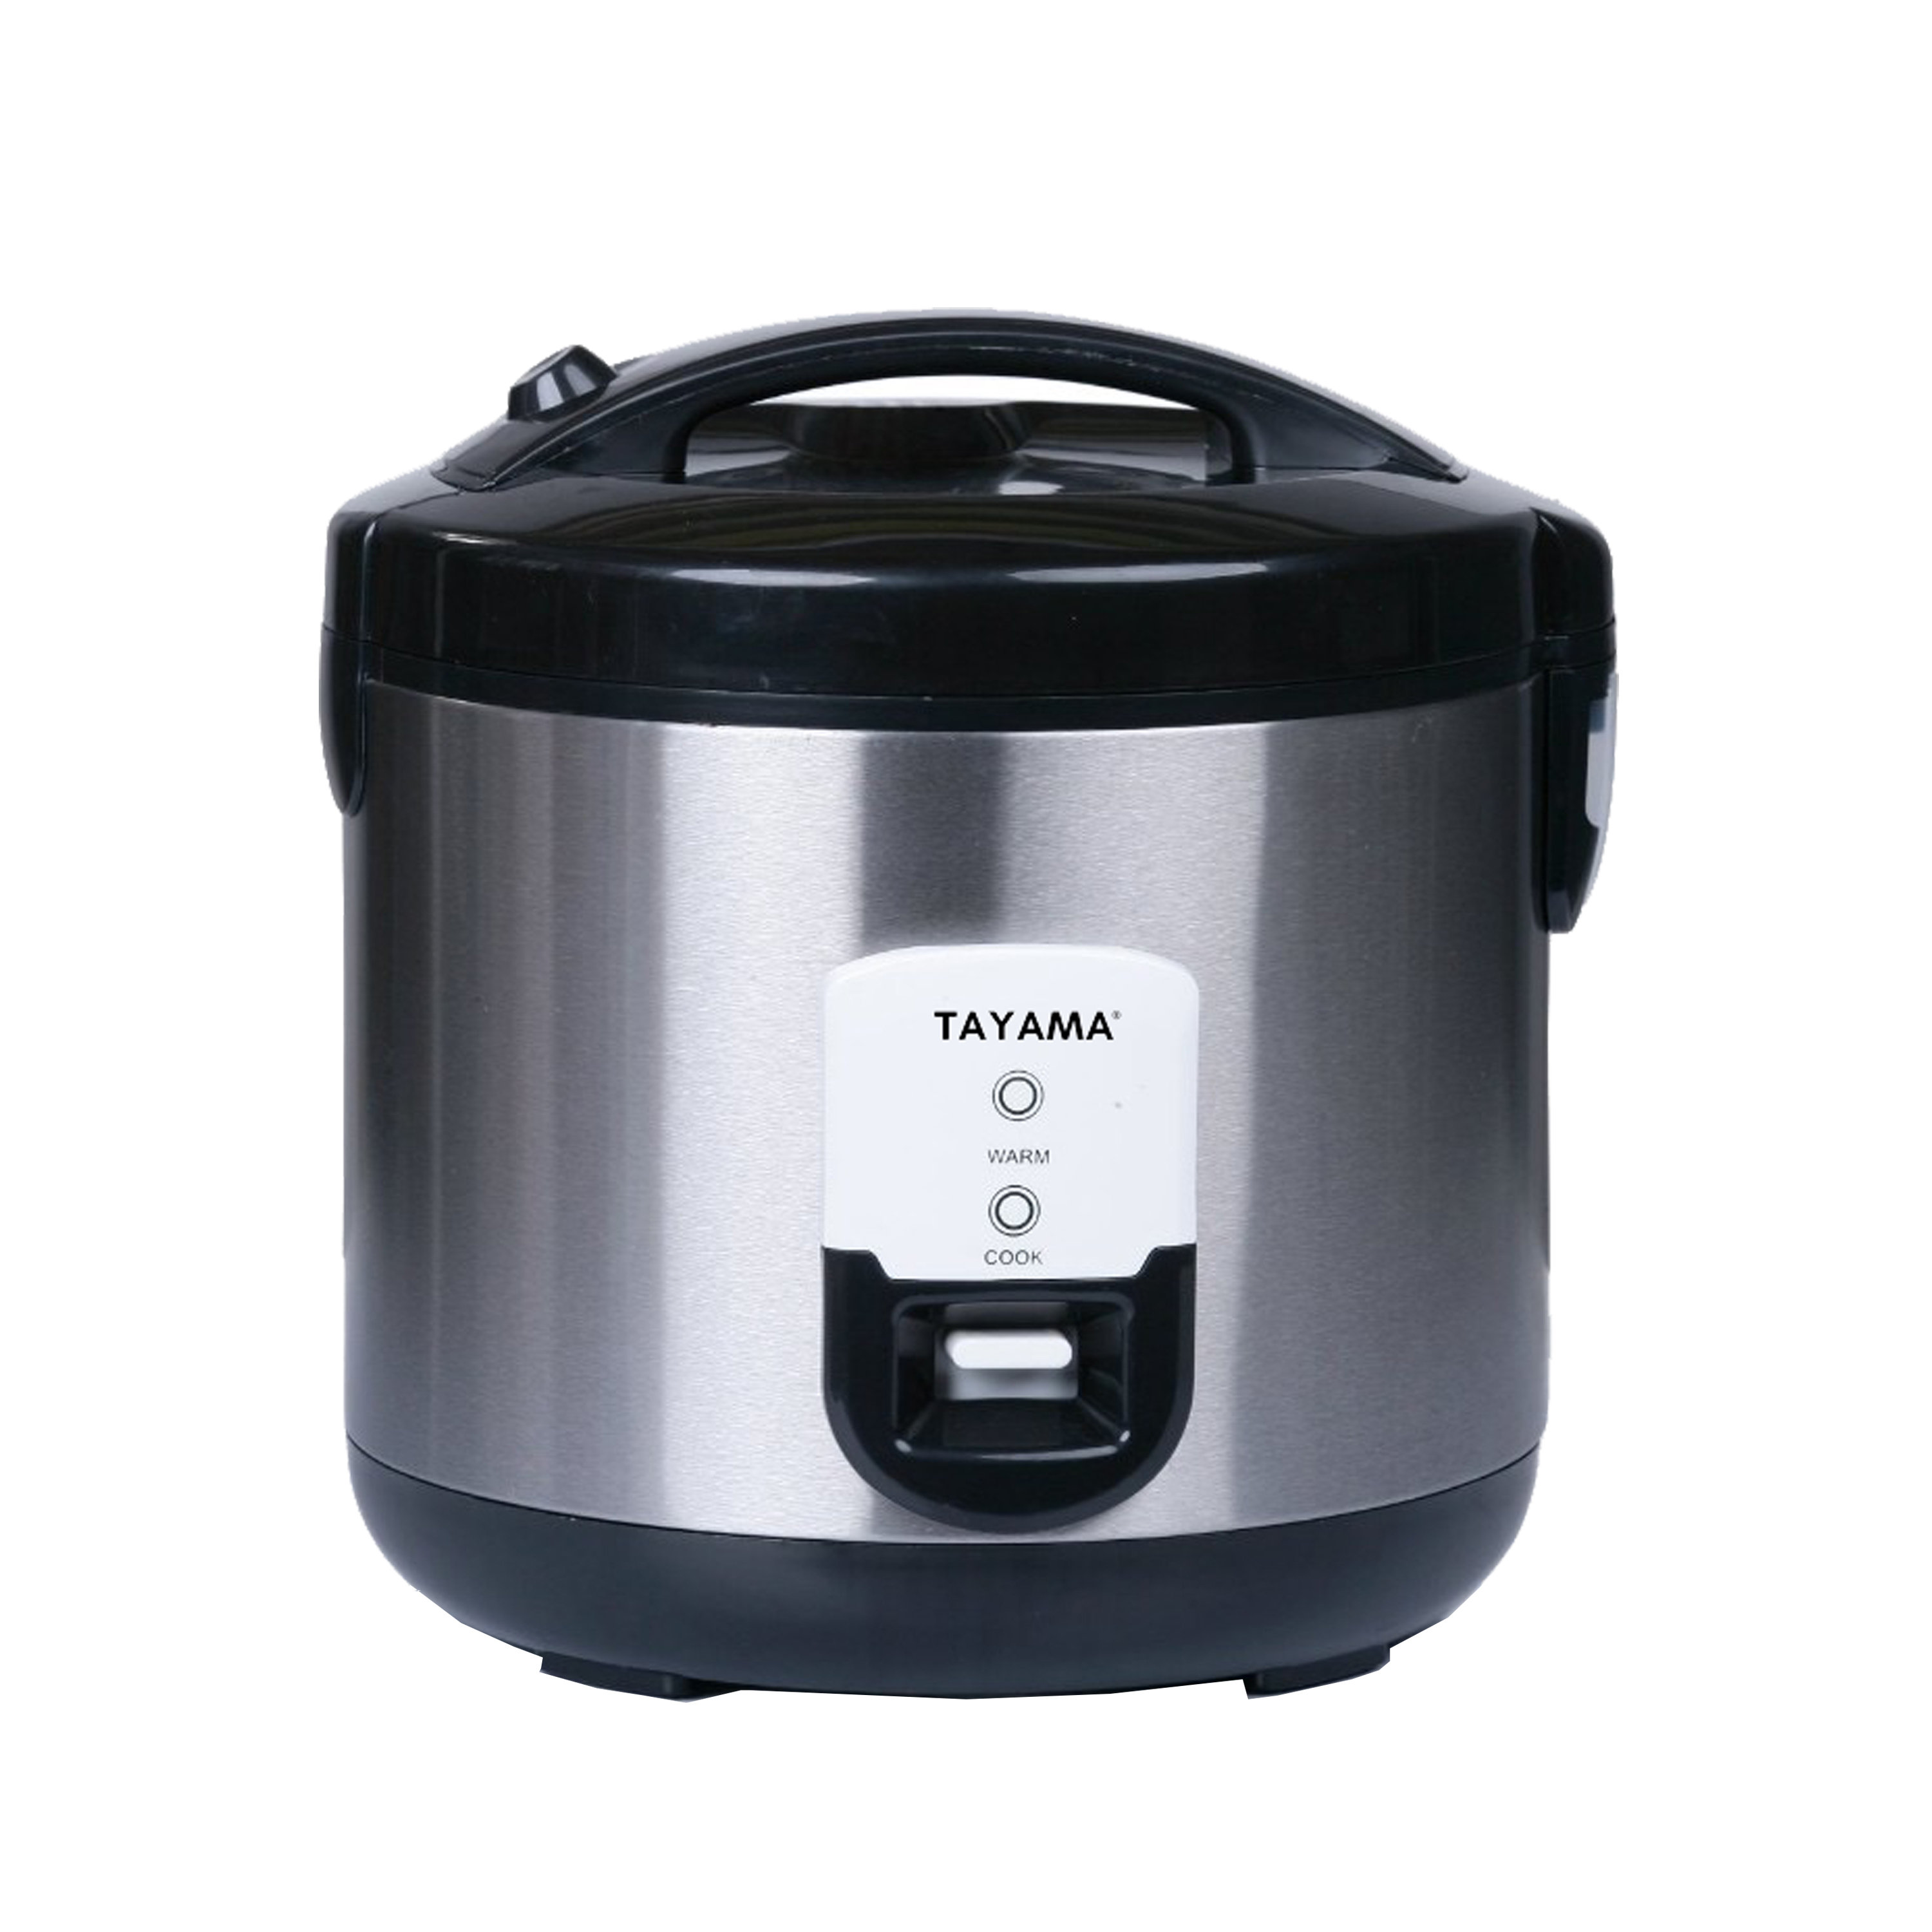 Oyama 5-cup Stainless Steel Inner Cooking Pot